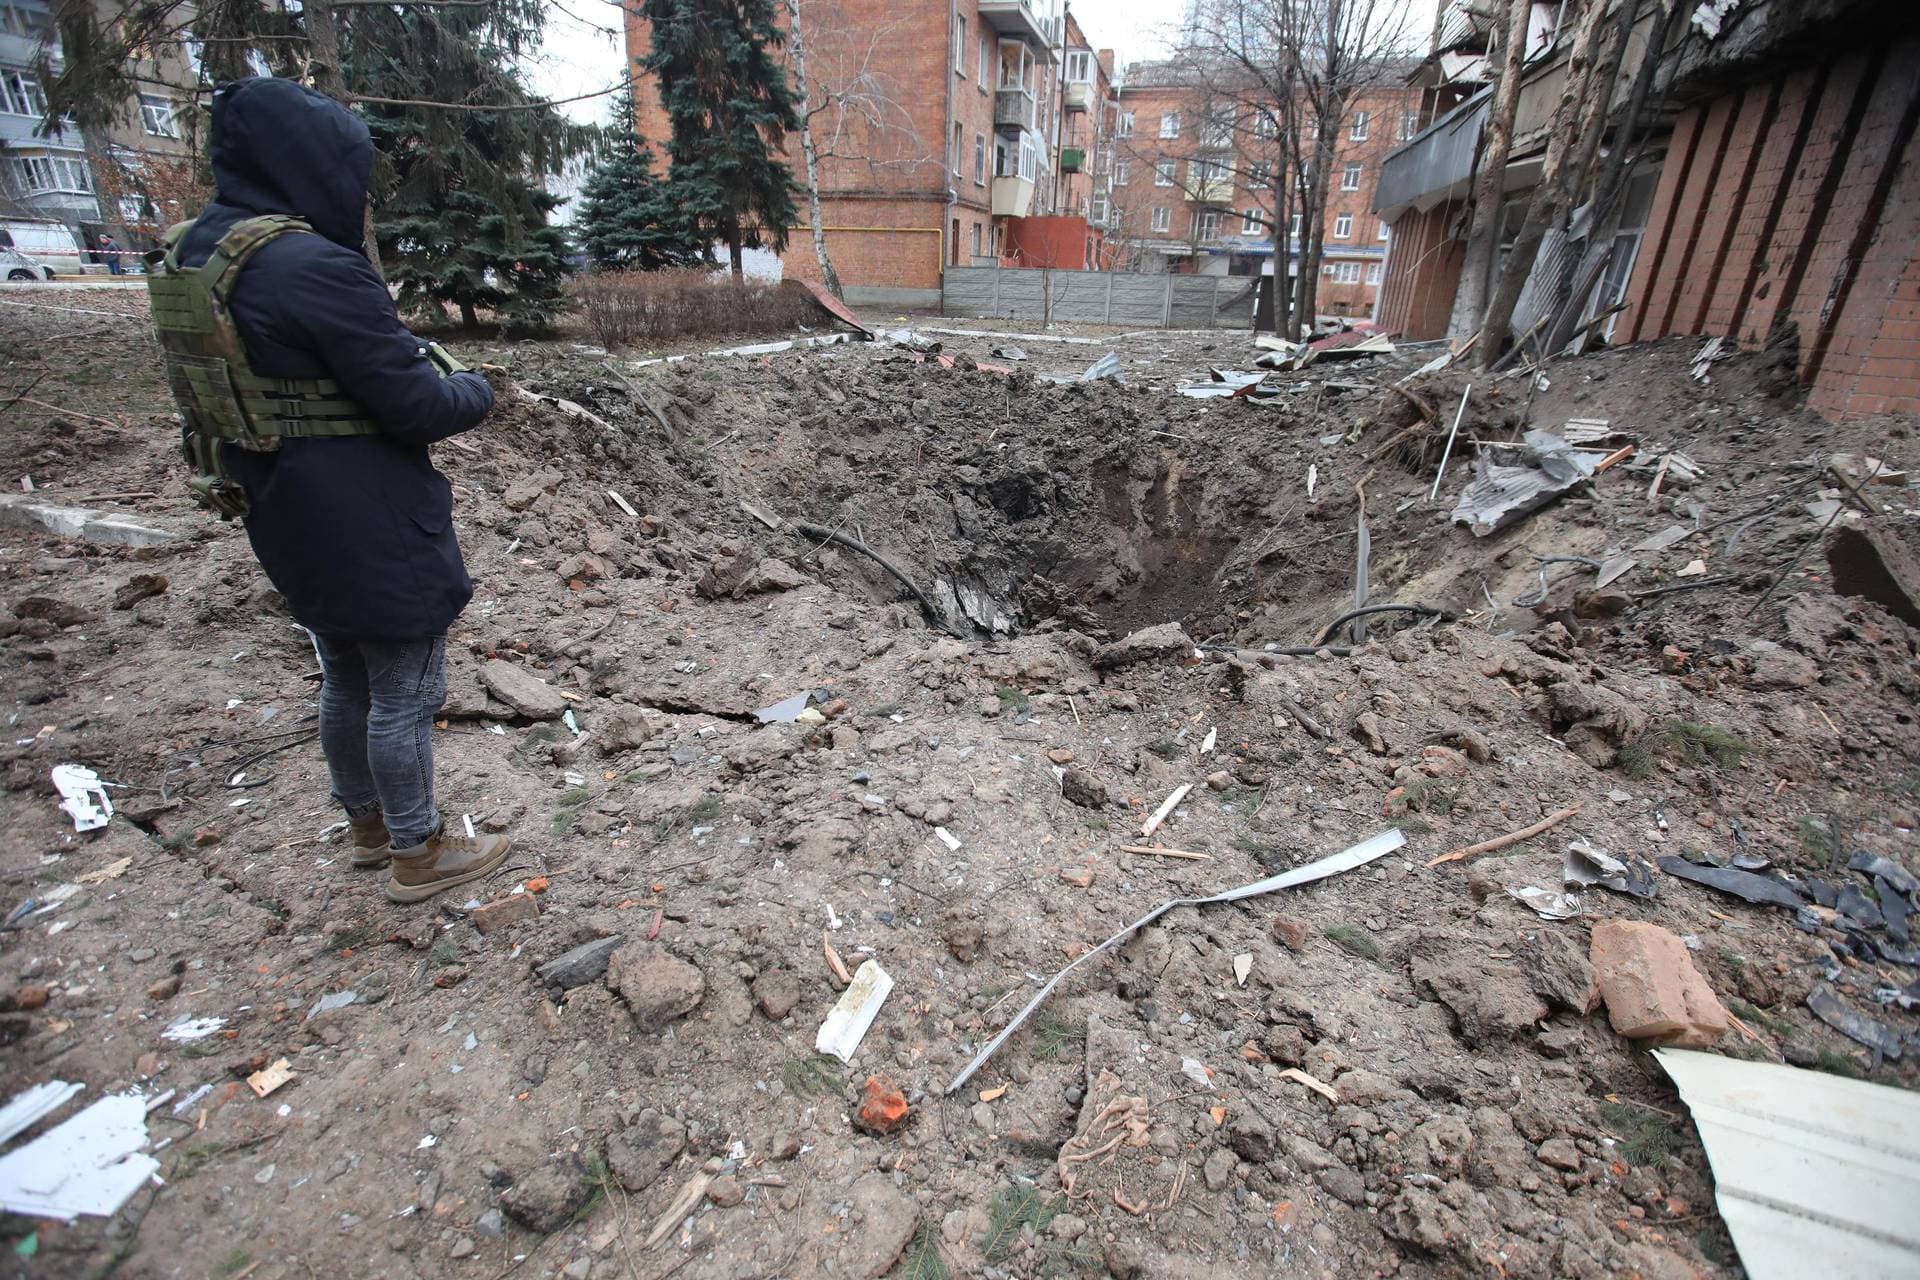 A person in a bulletproof vest stands on the edge of a crater left by a Russian rocket during a Russian missile attack on Kharkiv